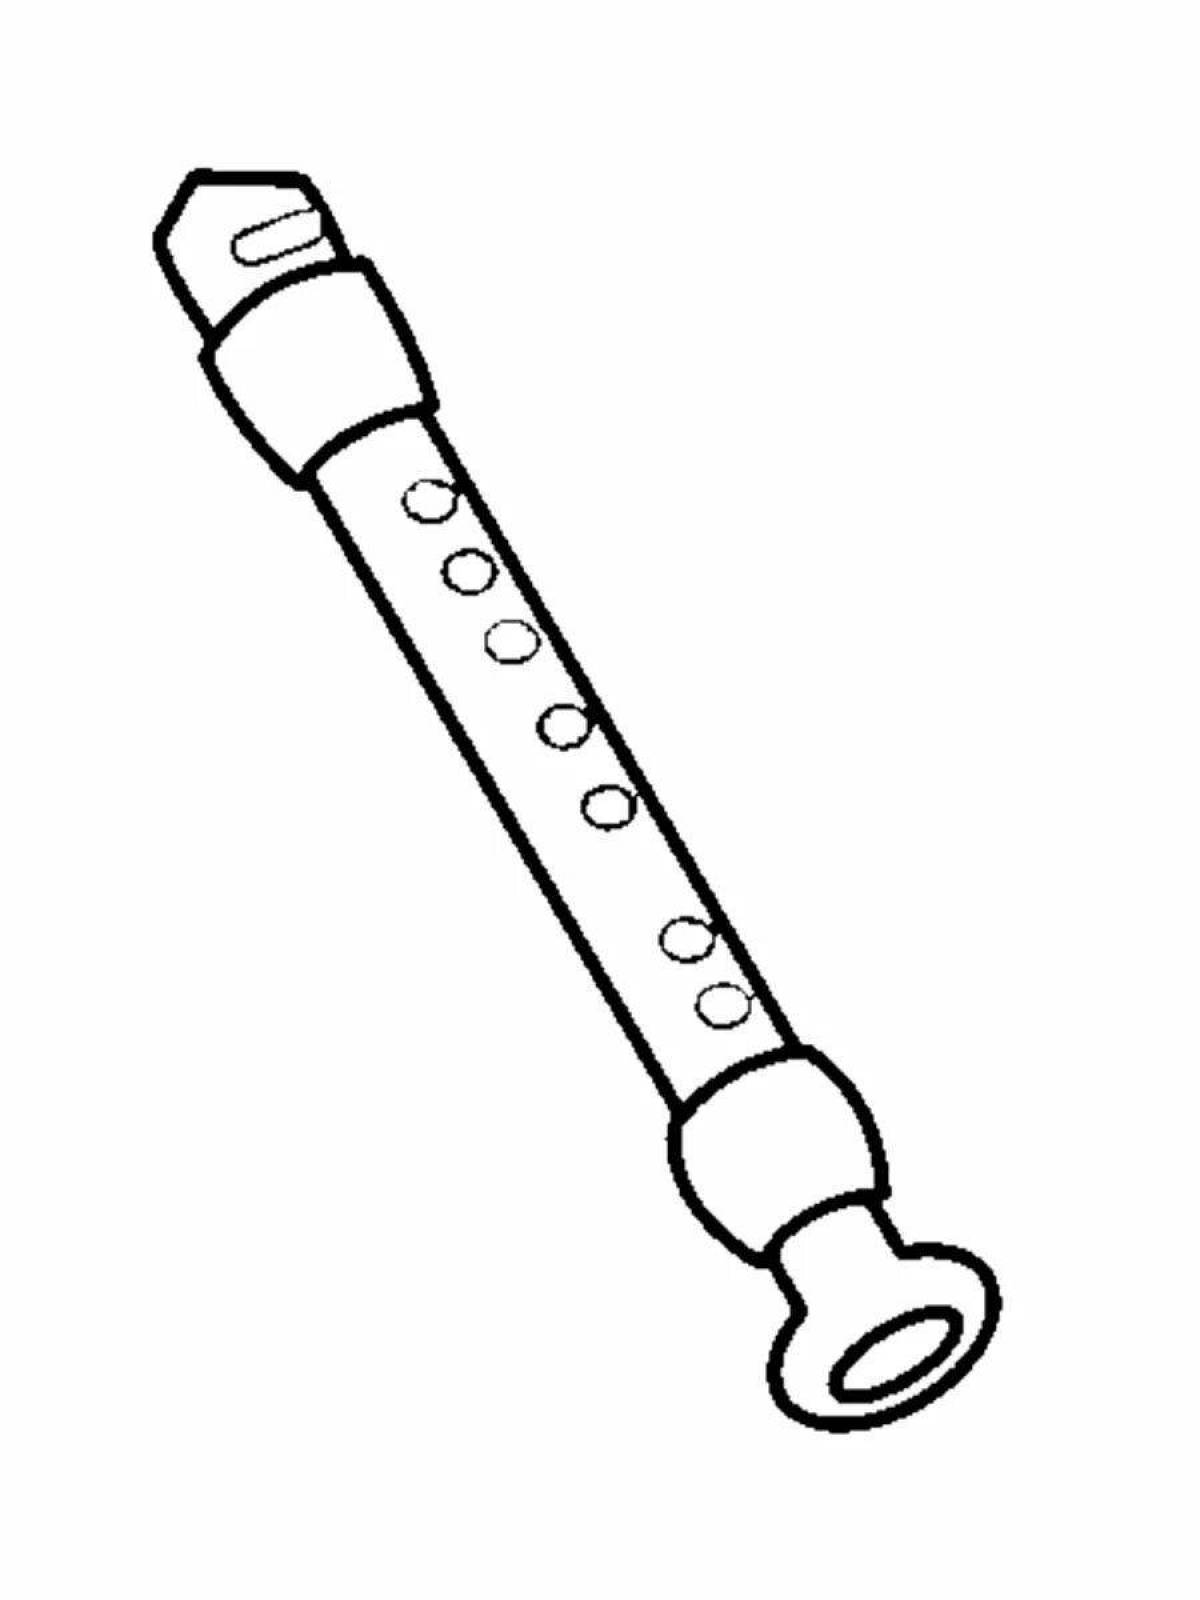 Colored Straws Coloring Page